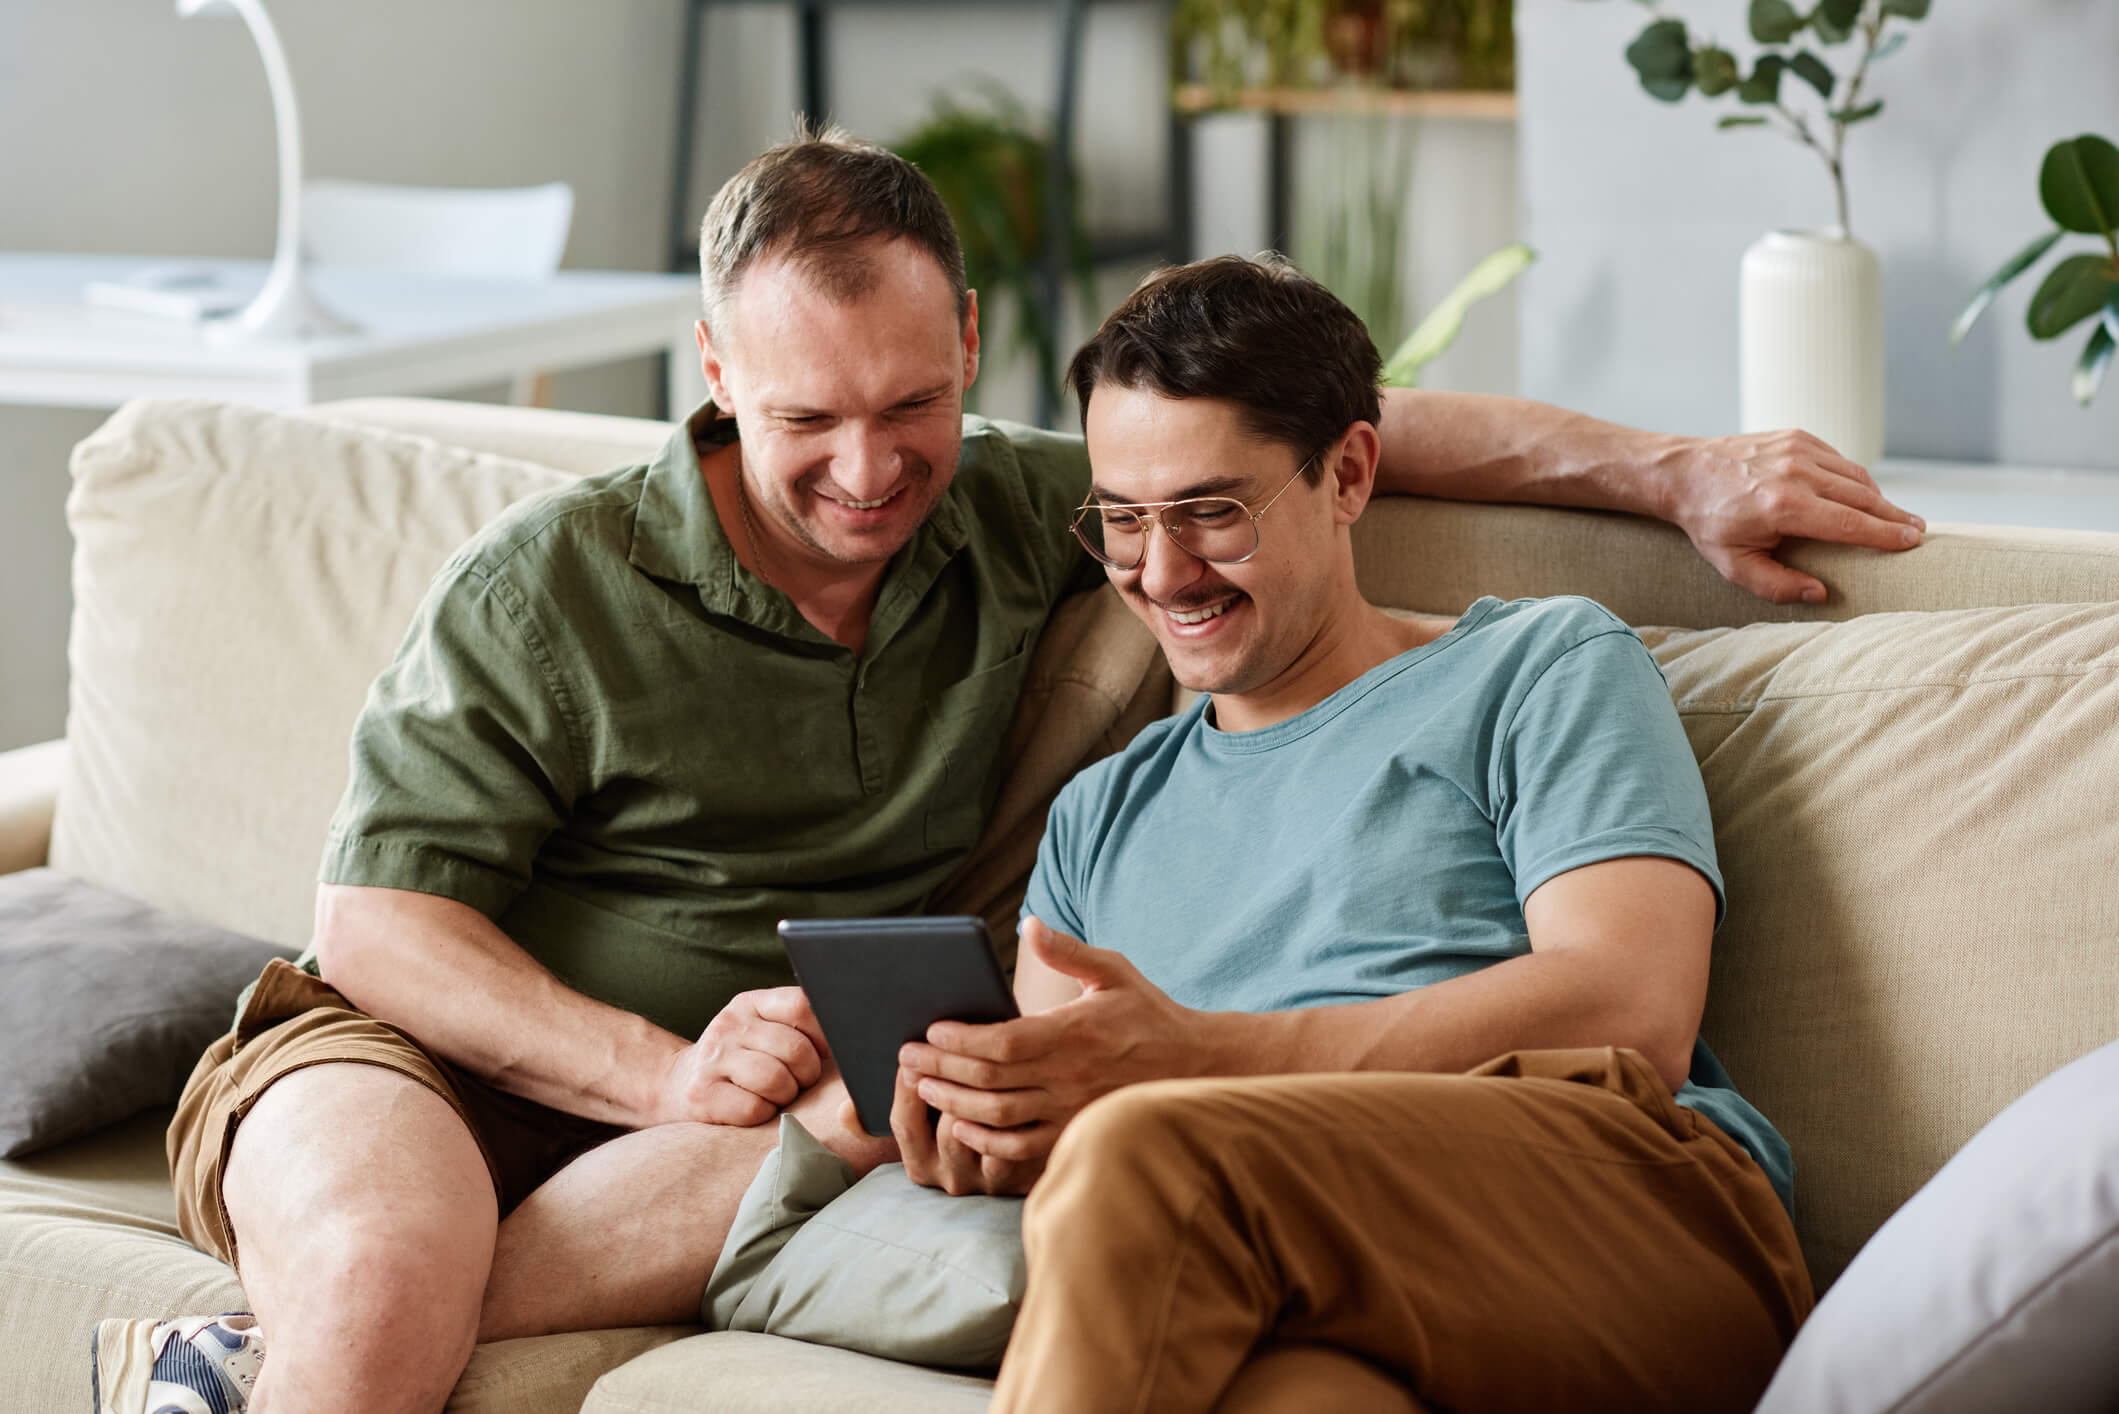 Two men are sitting on a couch and looking at a tablet screen; they are both smiling.